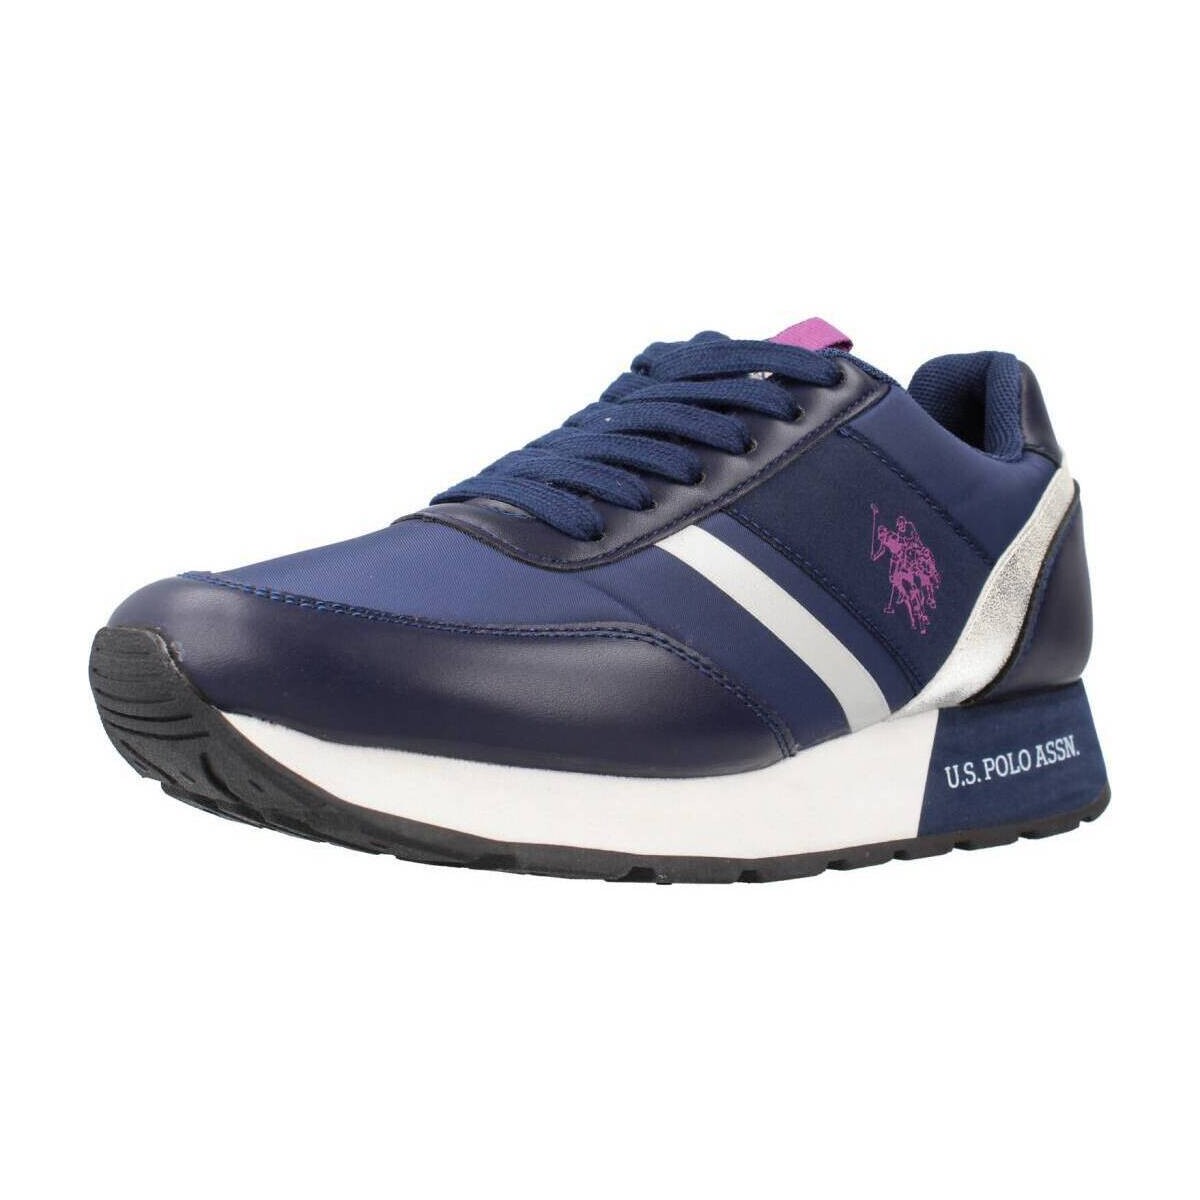 Xαμηλά Sneakers U.S Polo Assn. NOBIW002W